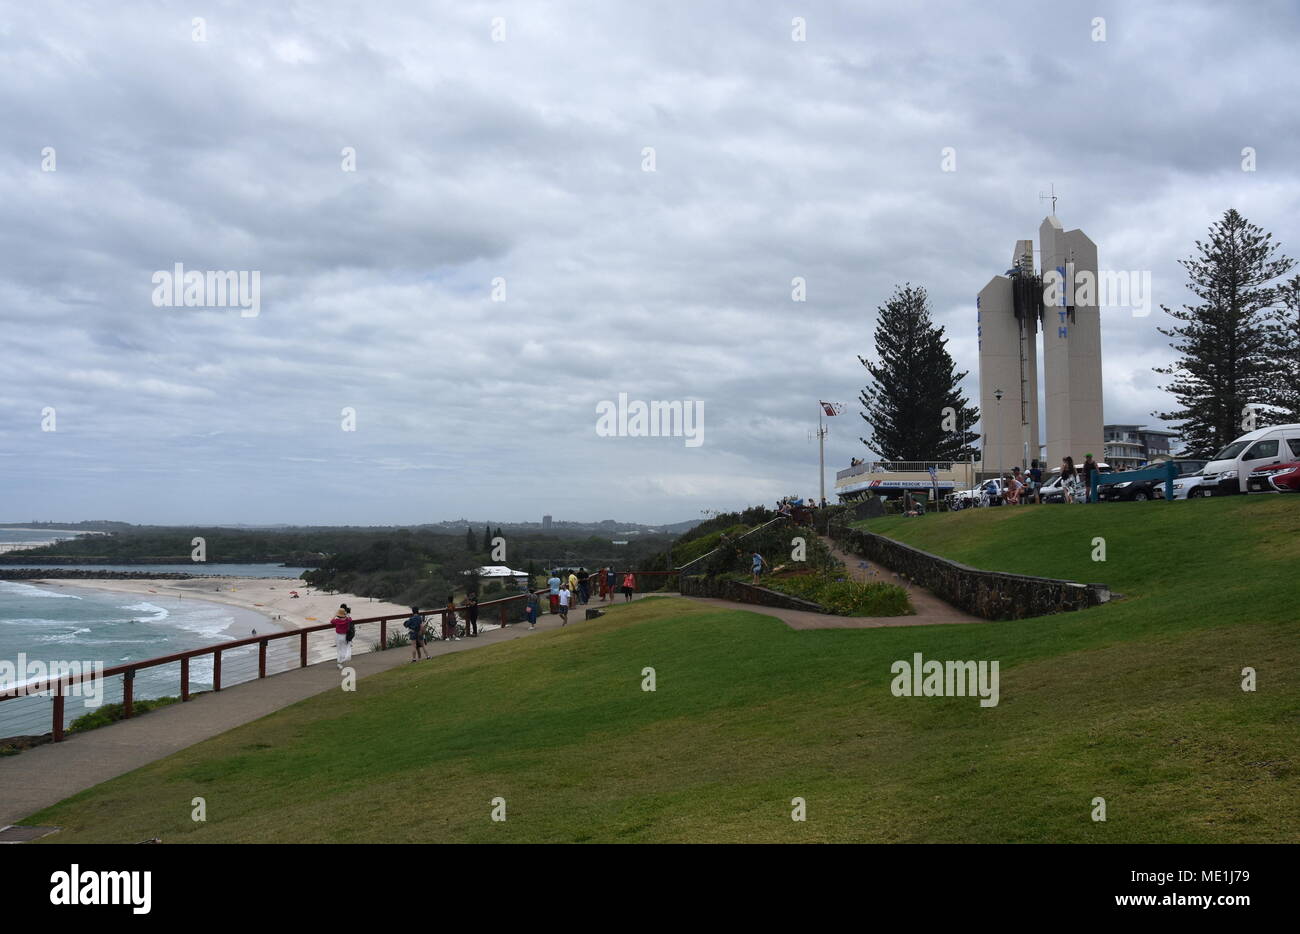 Tweed Heads, Australia - Dec 26, 2017. Captain Cook Memorial at Poing Danger in Lowers Rock Park. The monument is at the border of NSW and Queensland. Stock Photo